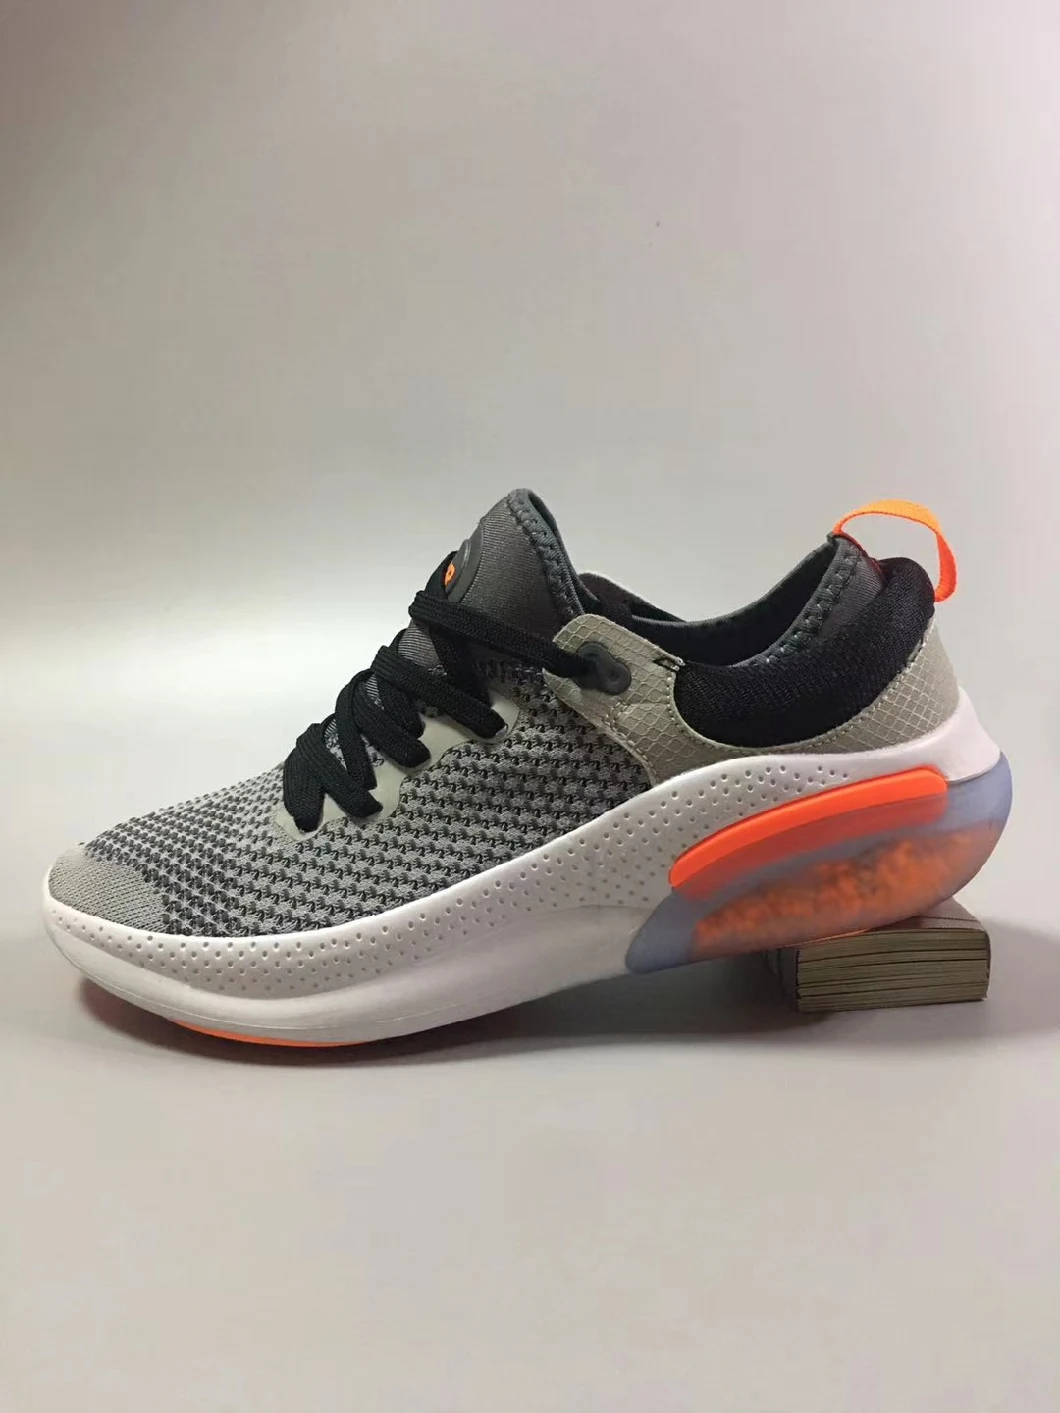 2022 Brand Men Running Casual Shoes Popular Leisure Shoes, Comfortable Athletic Women Sneaker Shoes, Low MOQ Stock Footwear New Style Fashion Sport Shoes